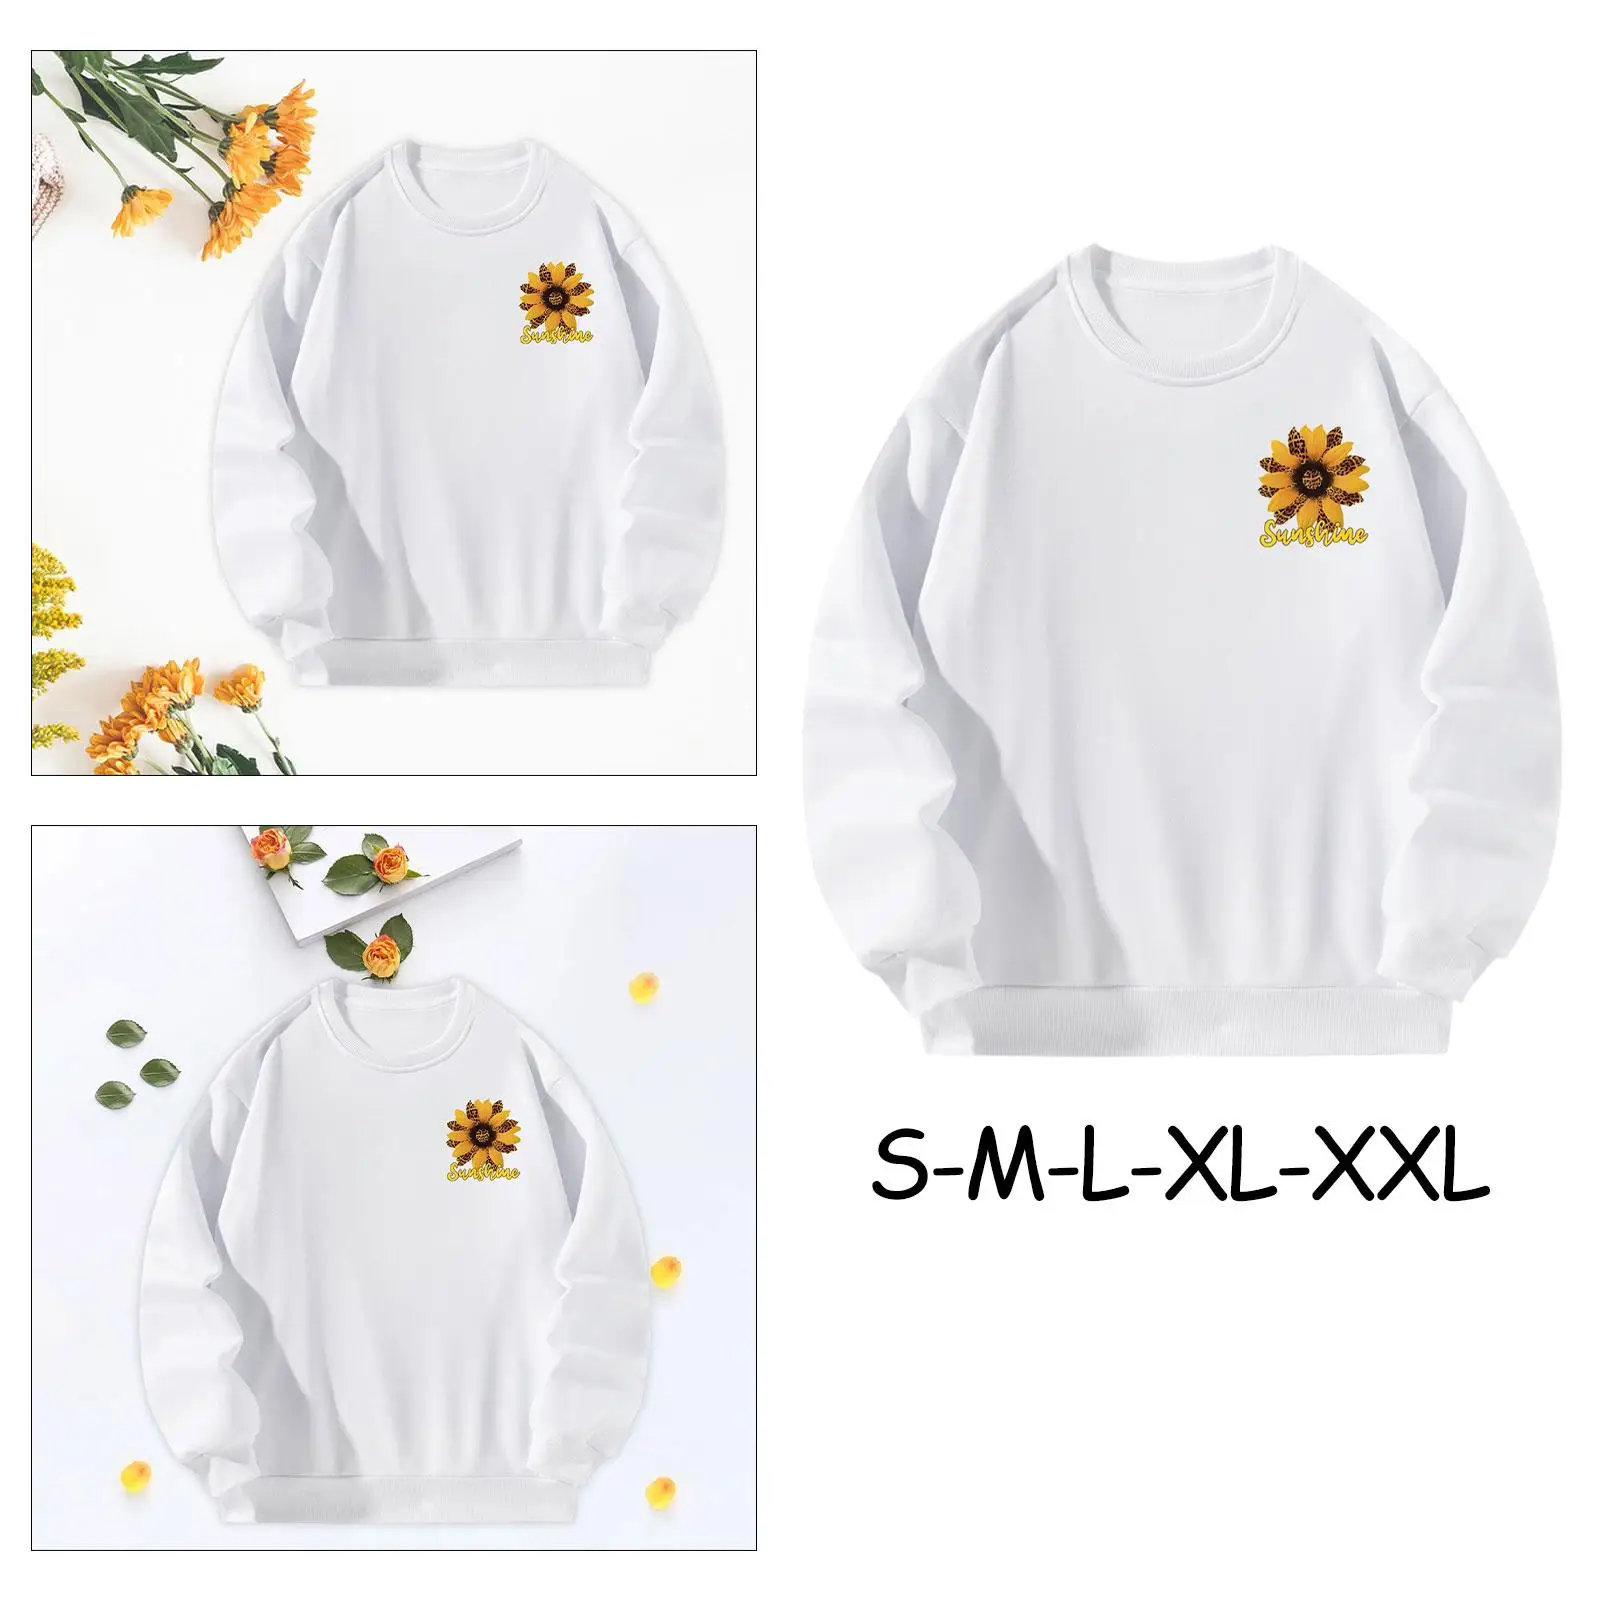 Sweatshirt for Women Printed Activewear Polyester Trendy Crewneck Sweatshirt for Going Out Daily Wear Shopping Sports Vacation